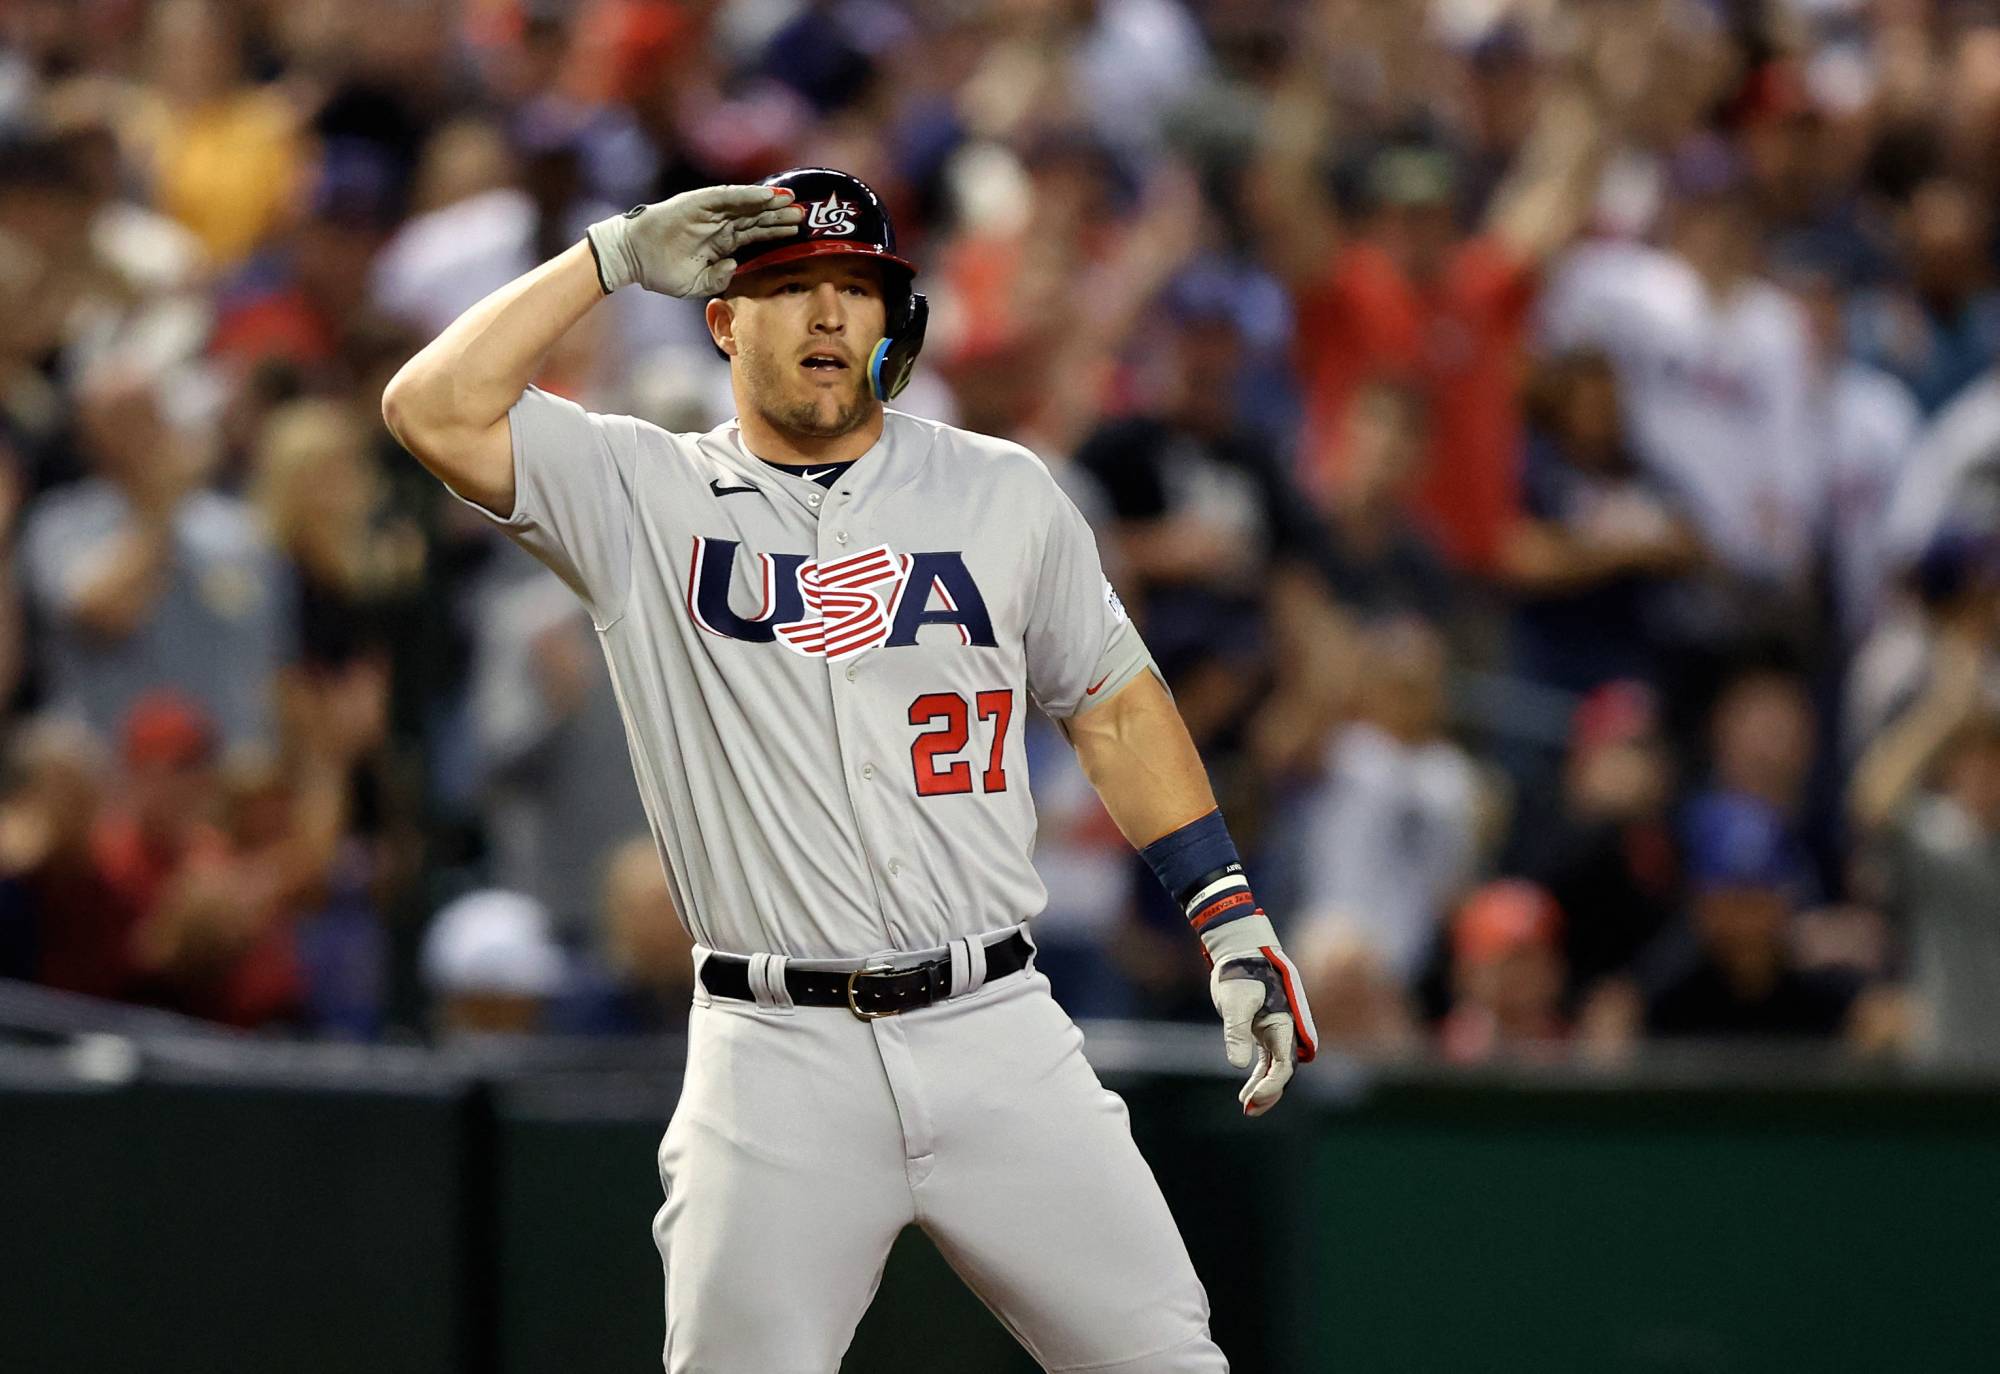 U.S. outfielder Mike Trout celebrates with a salute after hitting a triple in the first inning against Colombia during the World Baseball Classic at Chase Field in Phoenix on Wednesday.  | USA TODAY / VIA REUTERS